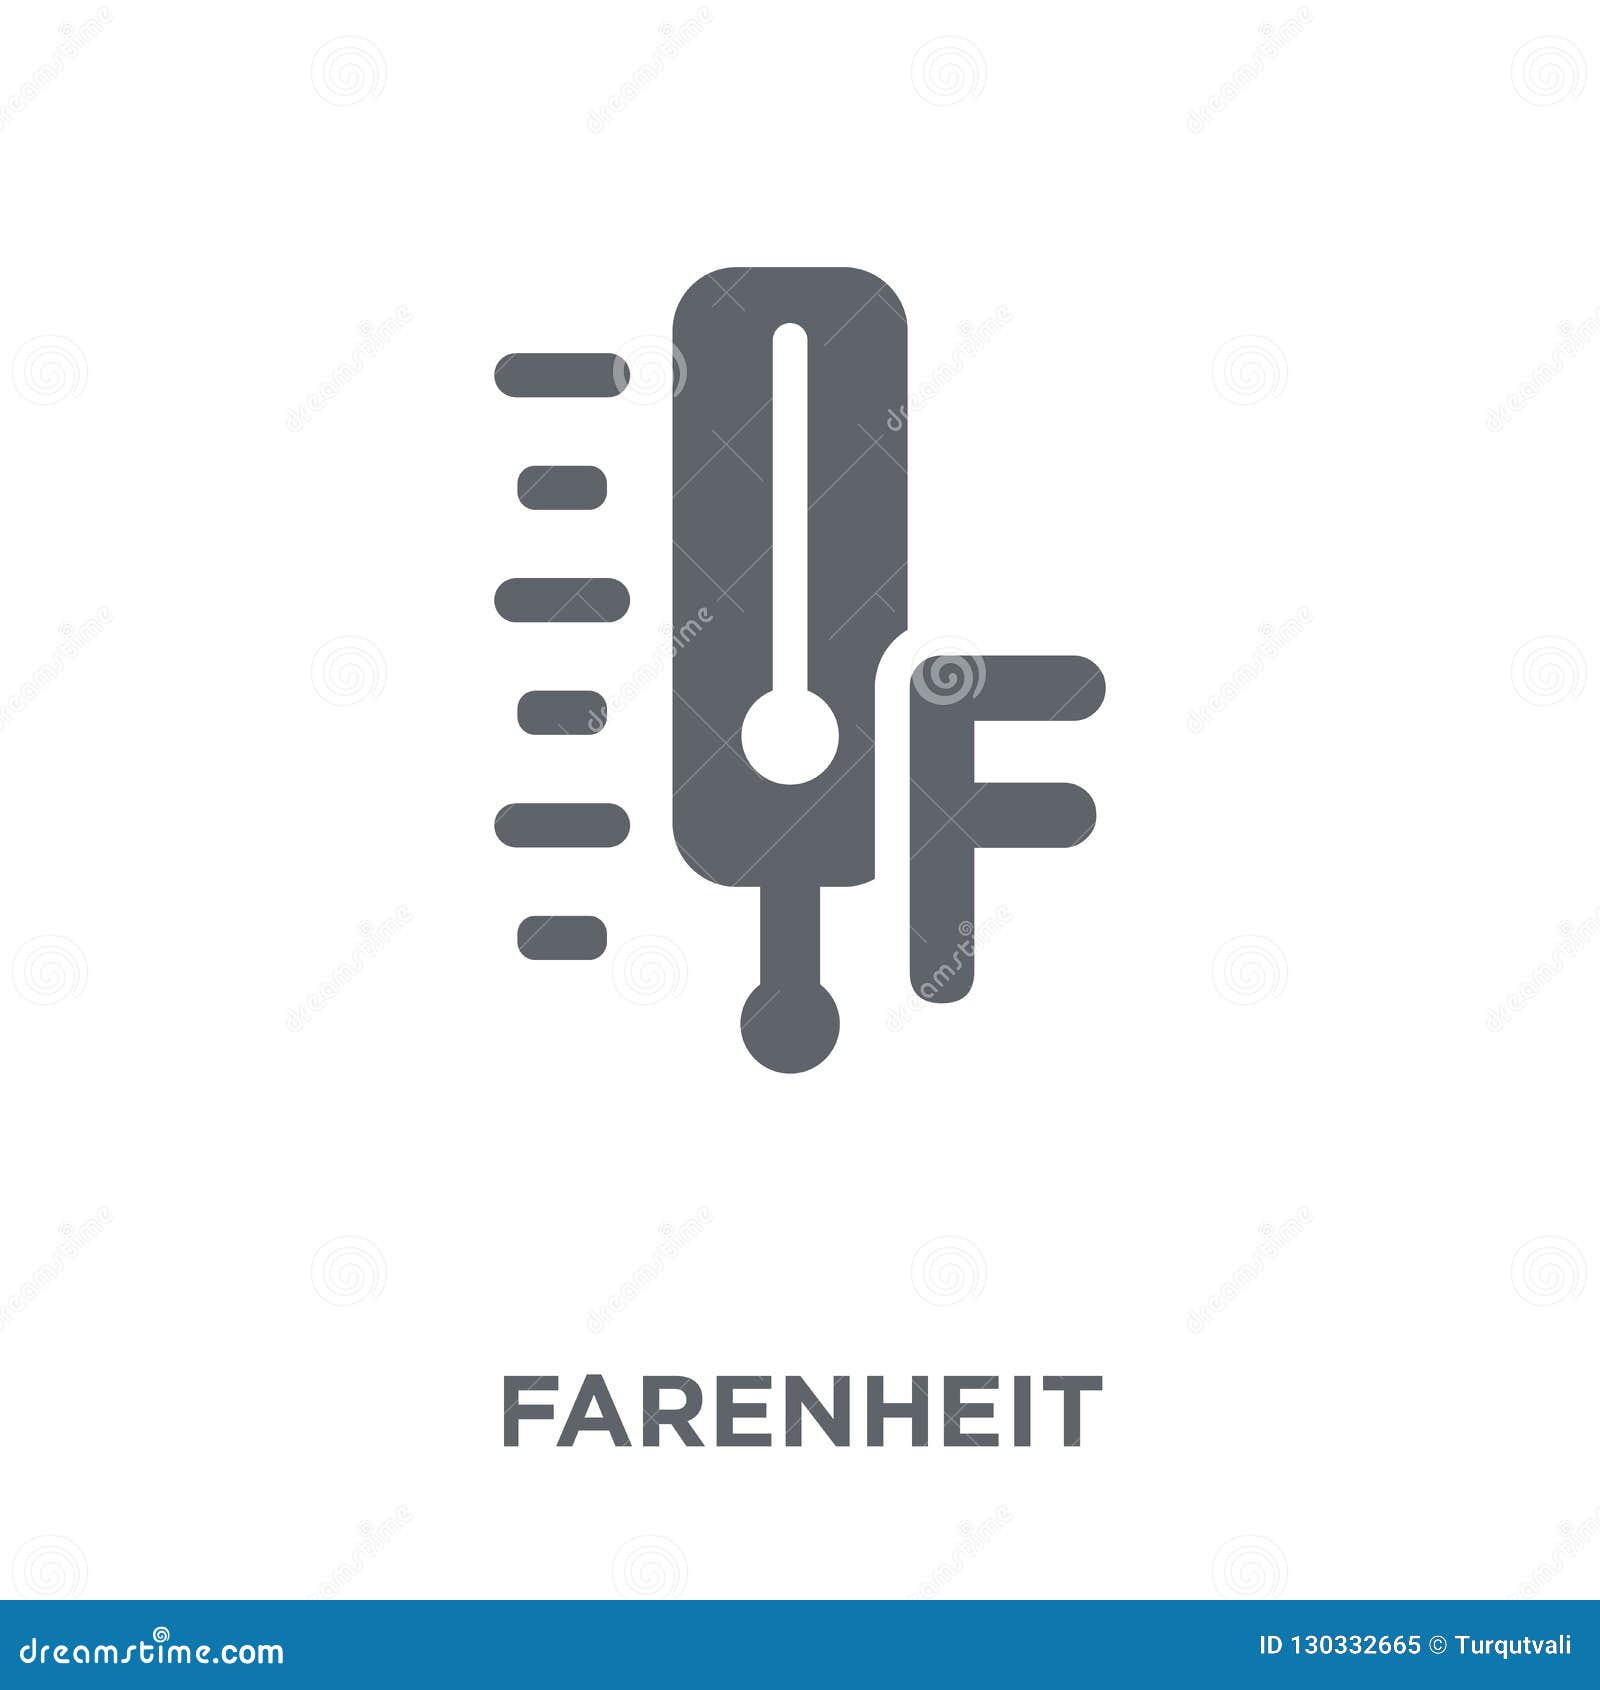 farenheit icon from collection.